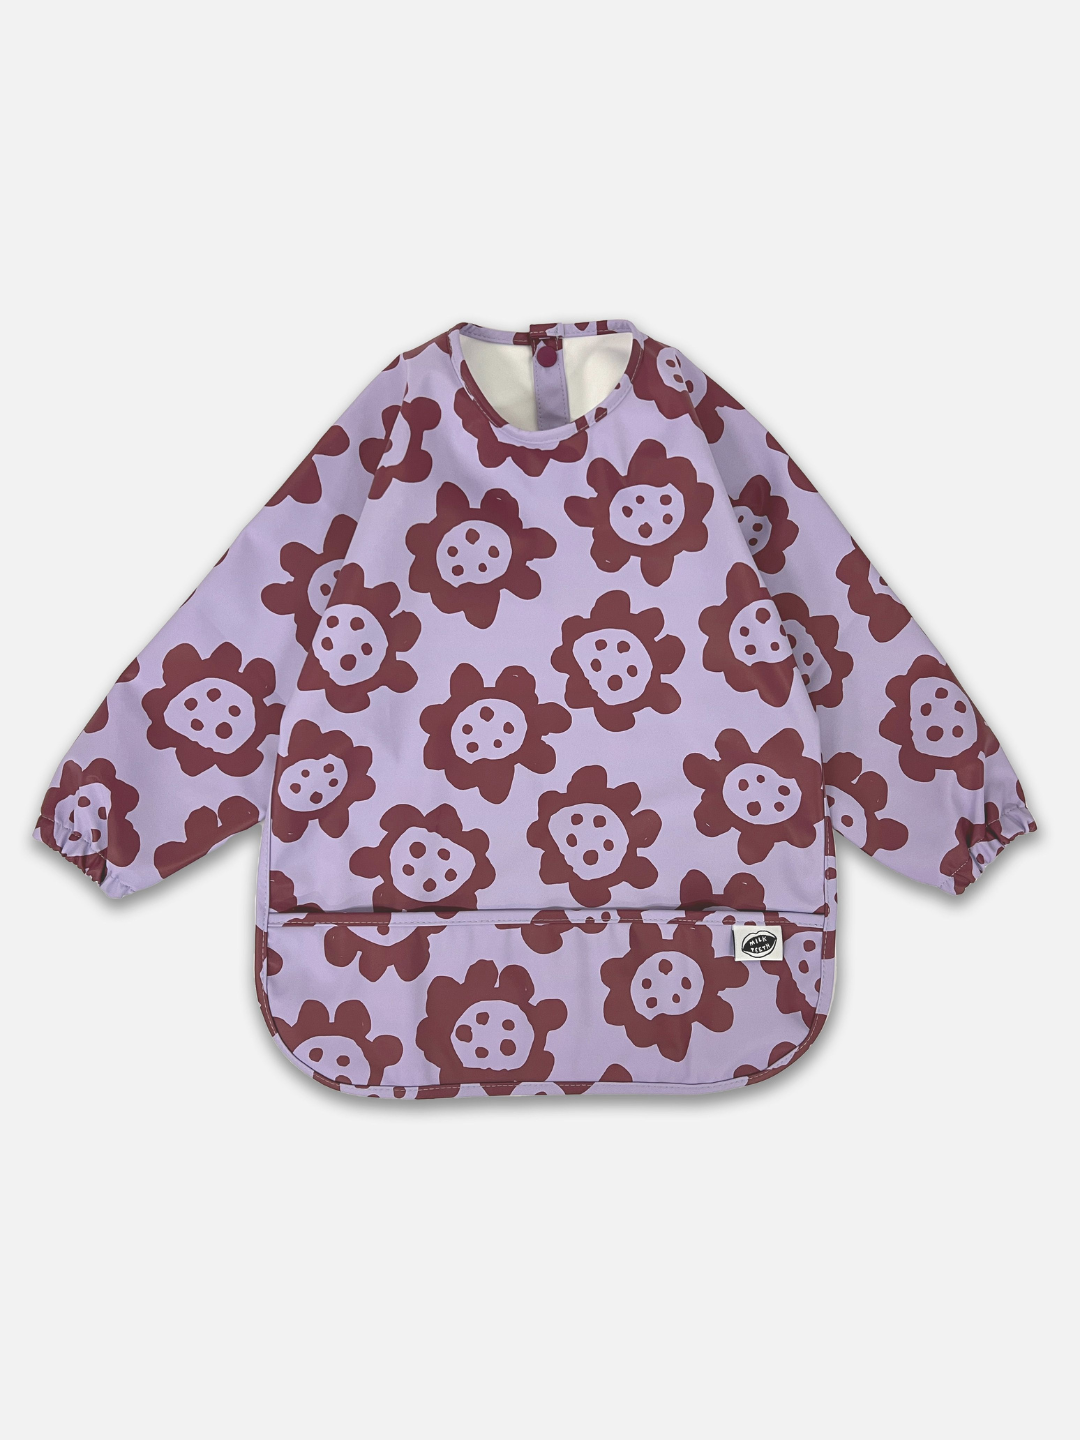 A front view of the long sleeve lavender colored bib with dark purple sunflowers and a front pocket.